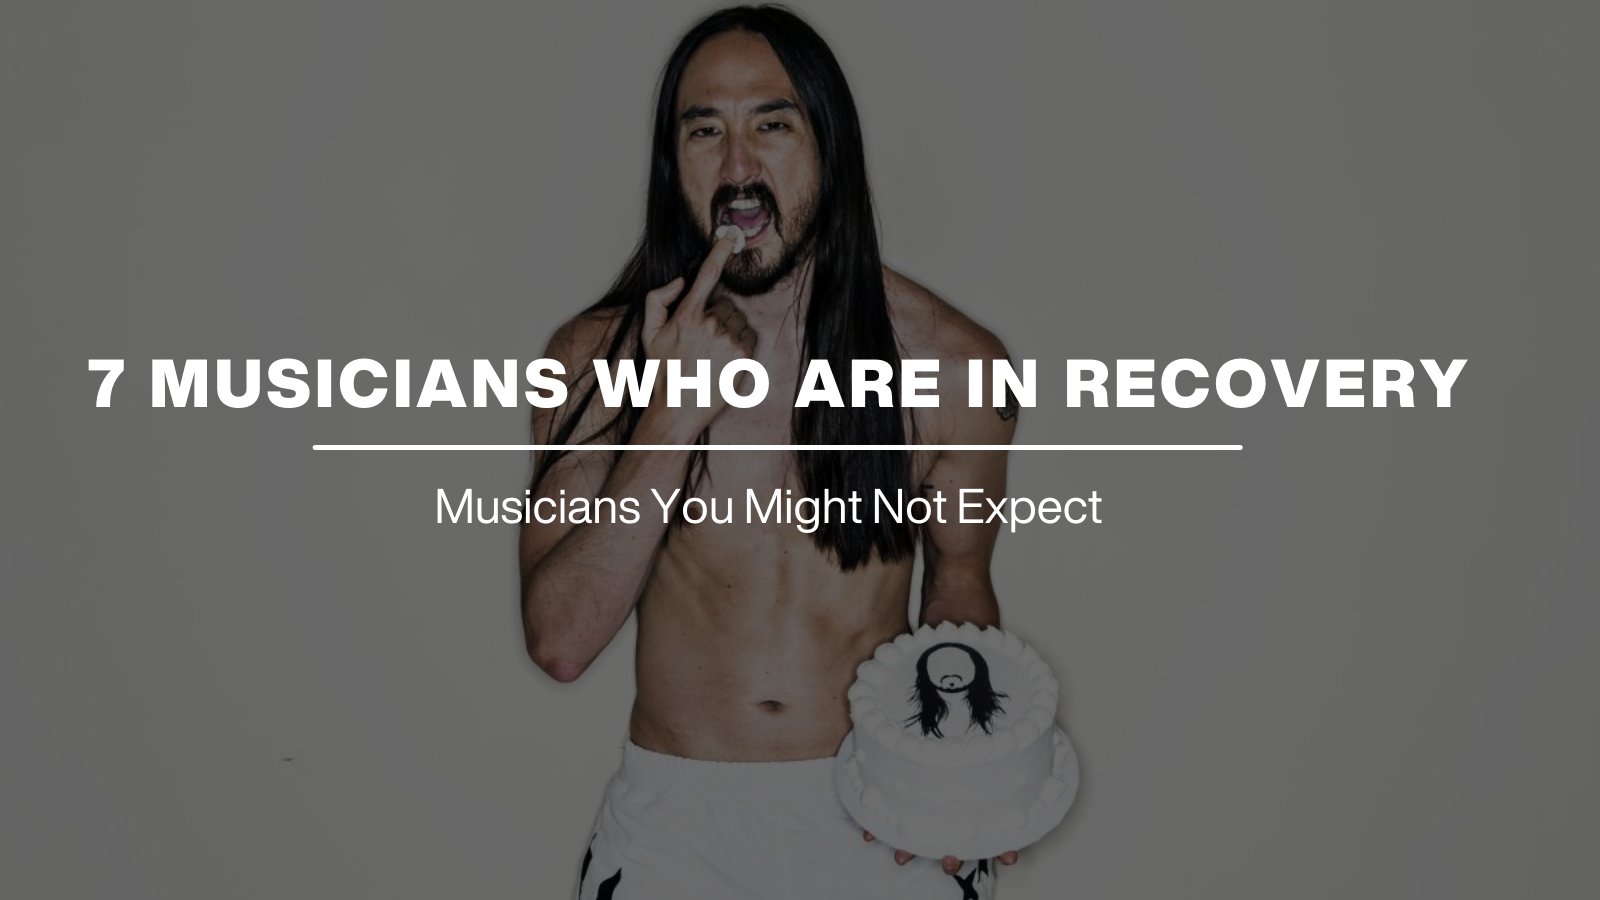 7 MUSICIANS WHO ARE IN RECOVERY